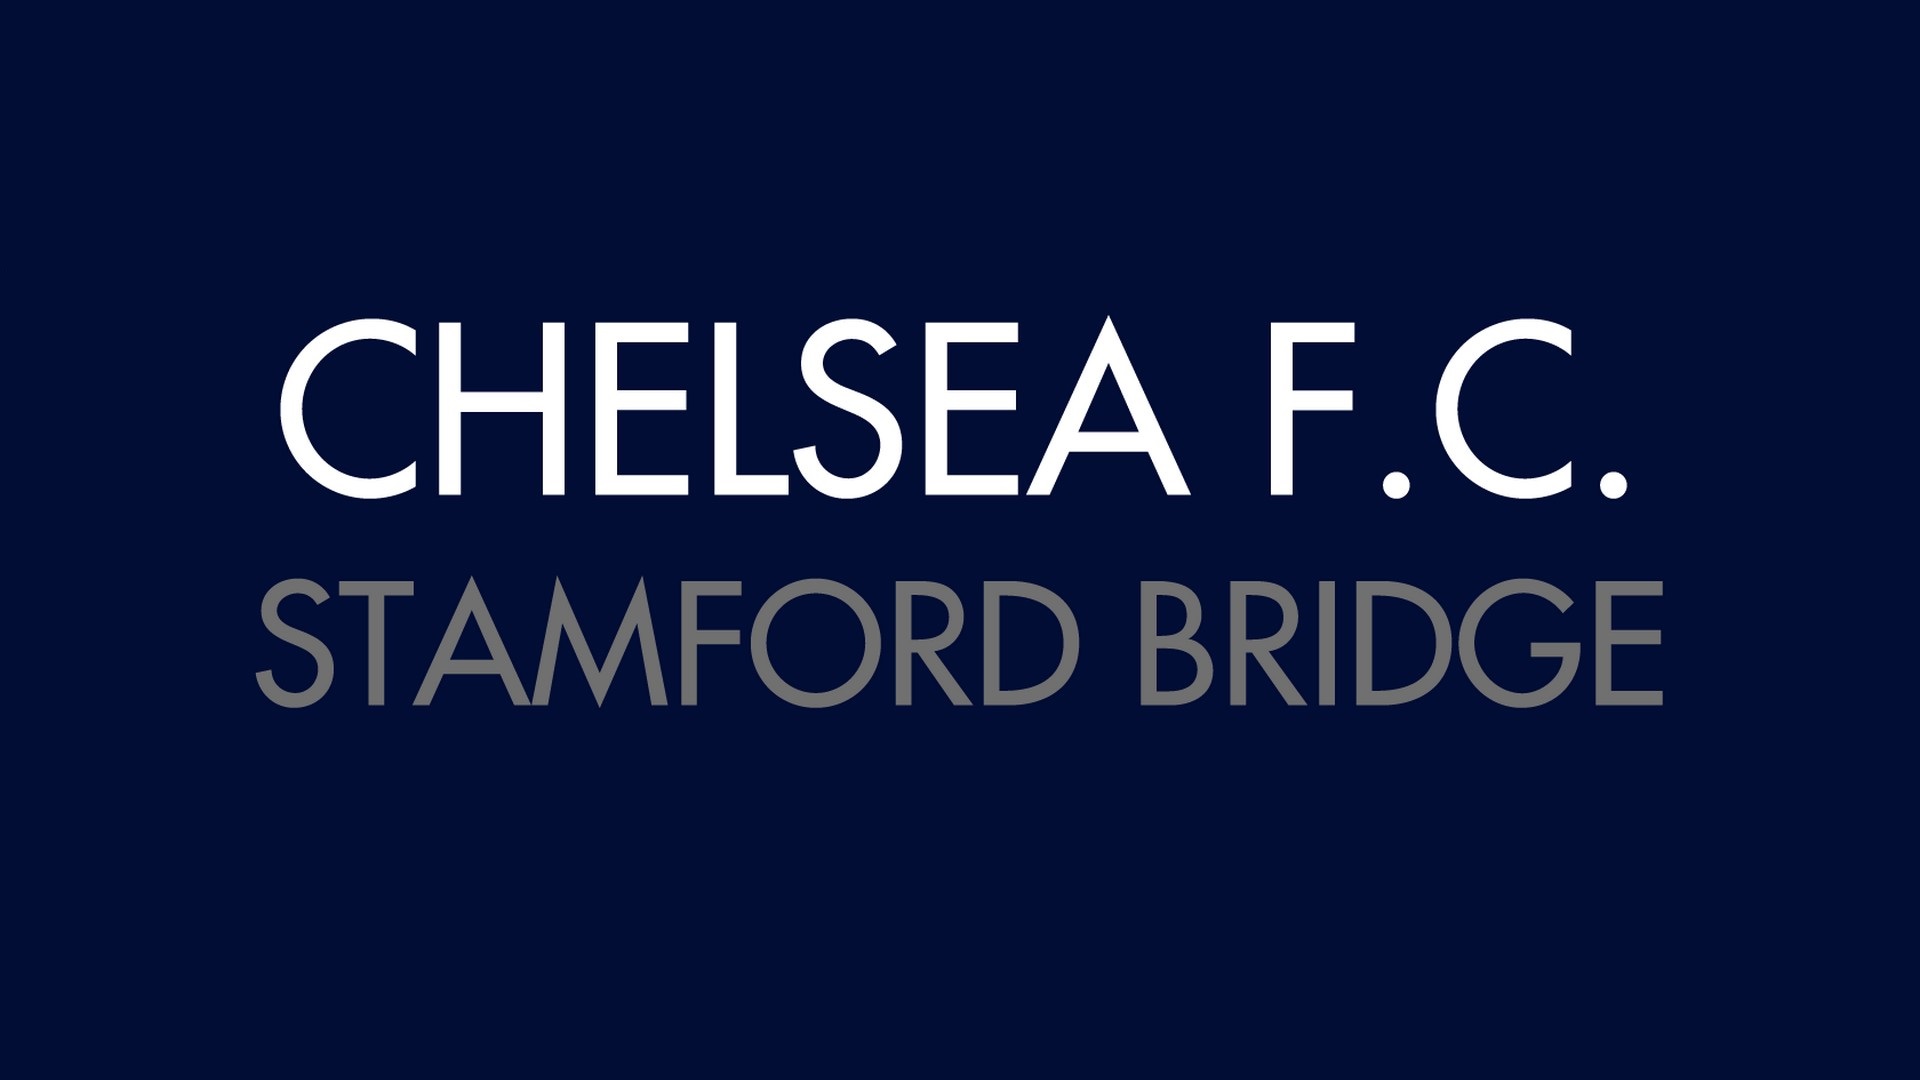 Wallpapers Chelsea With high-resolution 1920X1080 pixel. You can use this wallpaper for your Desktop Computers, Mac Screensavers, Windows Backgrounds, iPhone Wallpapers, Tablet or Android Lock screen and another Mobile device